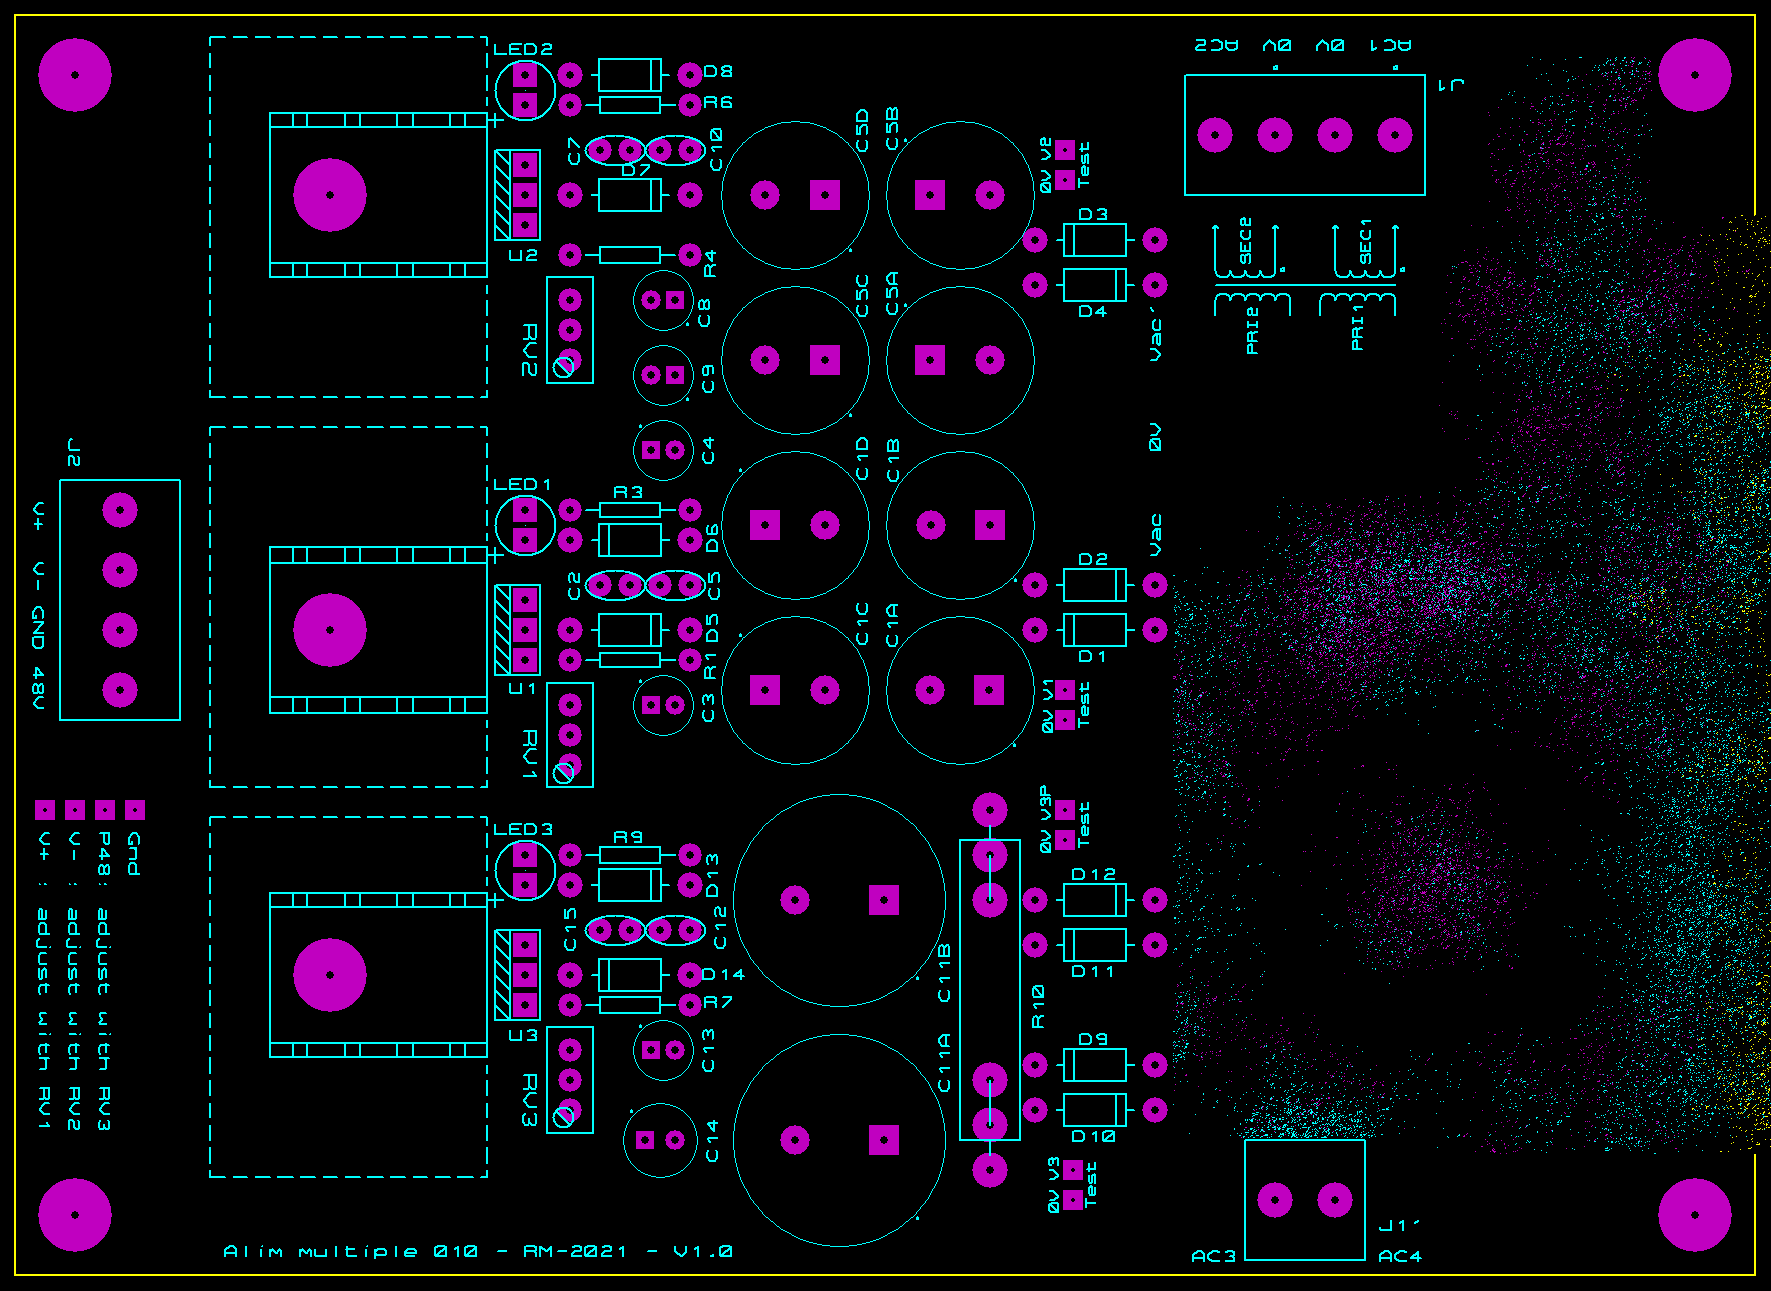 alim_multiple_010_pcb_components_top